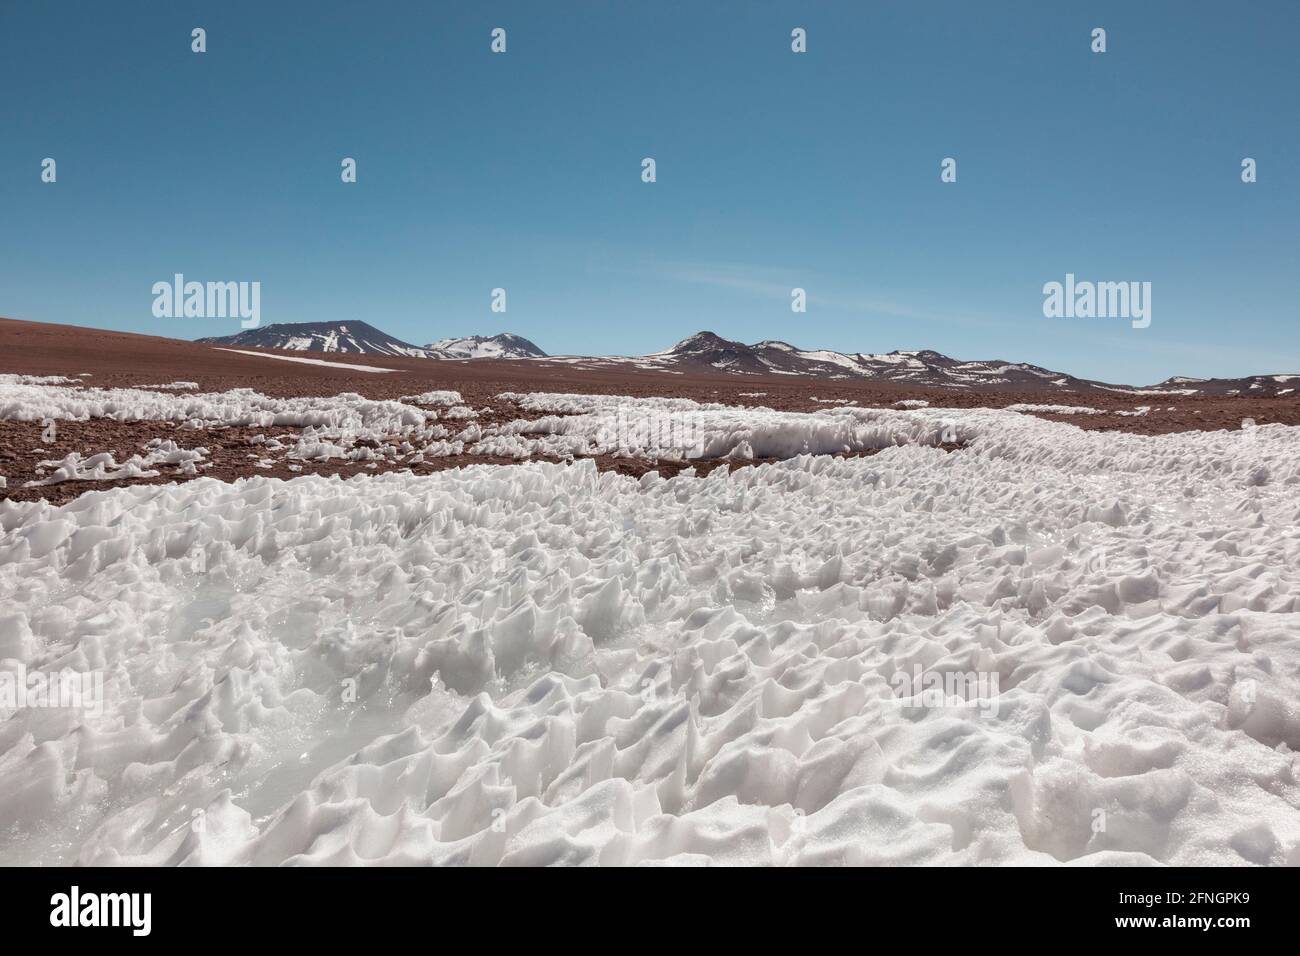 Wind sculpted snow on plateau in the Bolivian desert Stock Photo